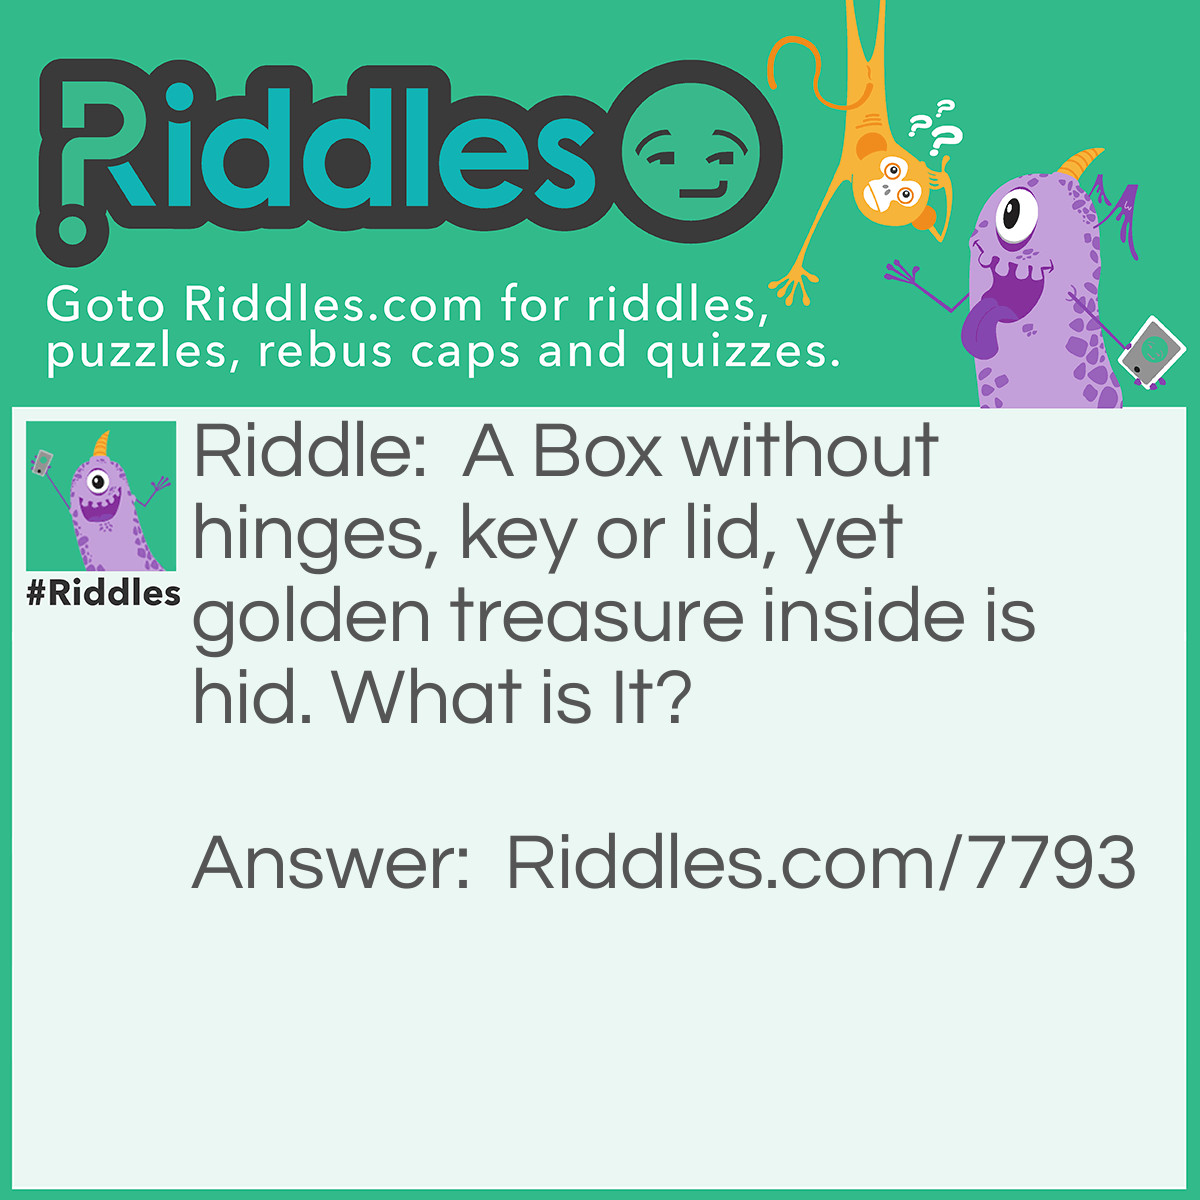 Riddle: A Box without hinges, key or lid, yet golden treasure inside is hid. What is It? Answer: An Egg